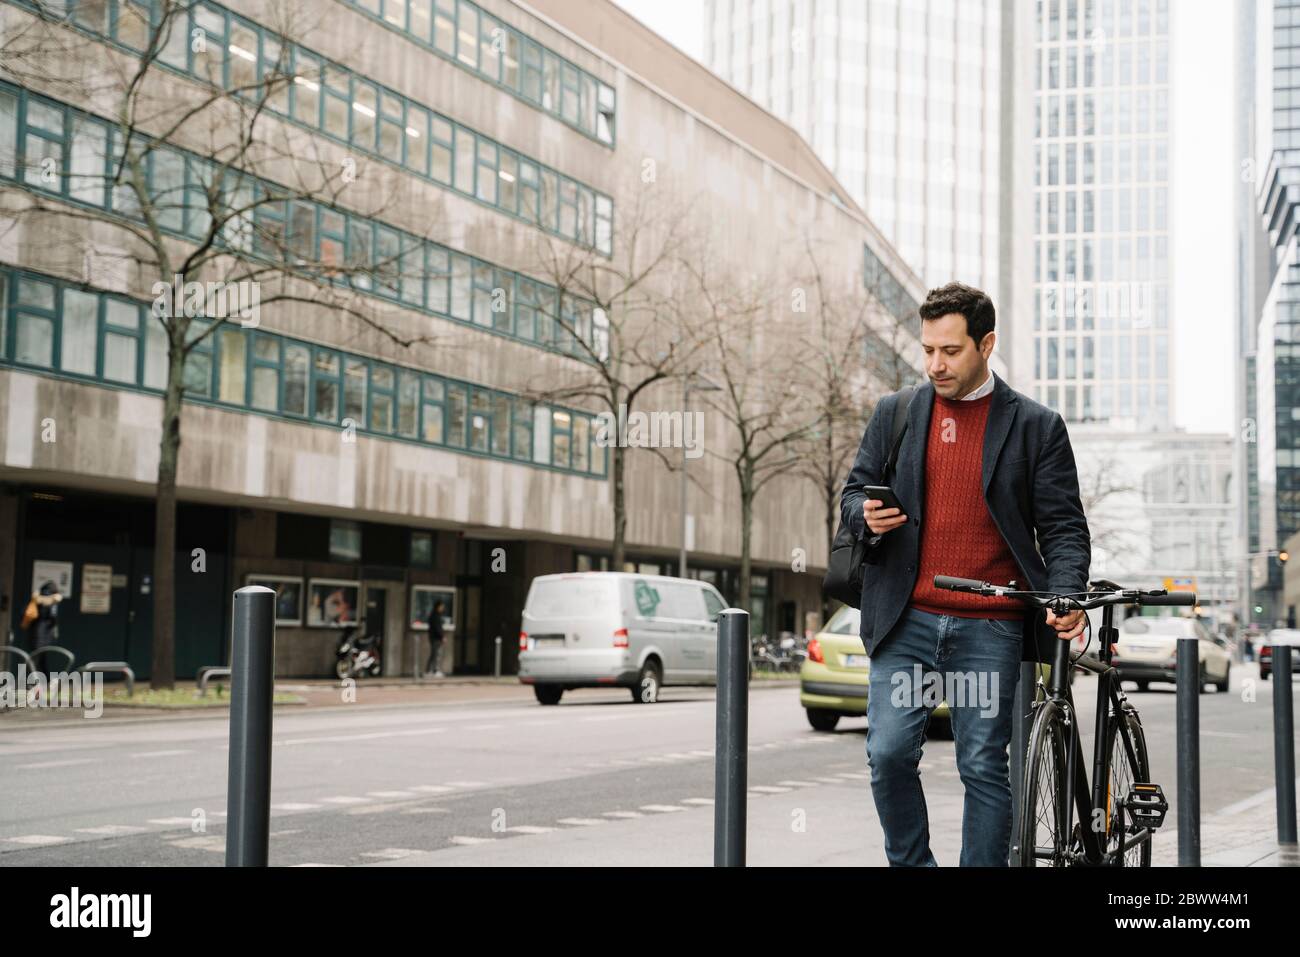 Businessman with bicycle using smart phone while walking against buildings in city, Frankfurt, Germany Stock Photo